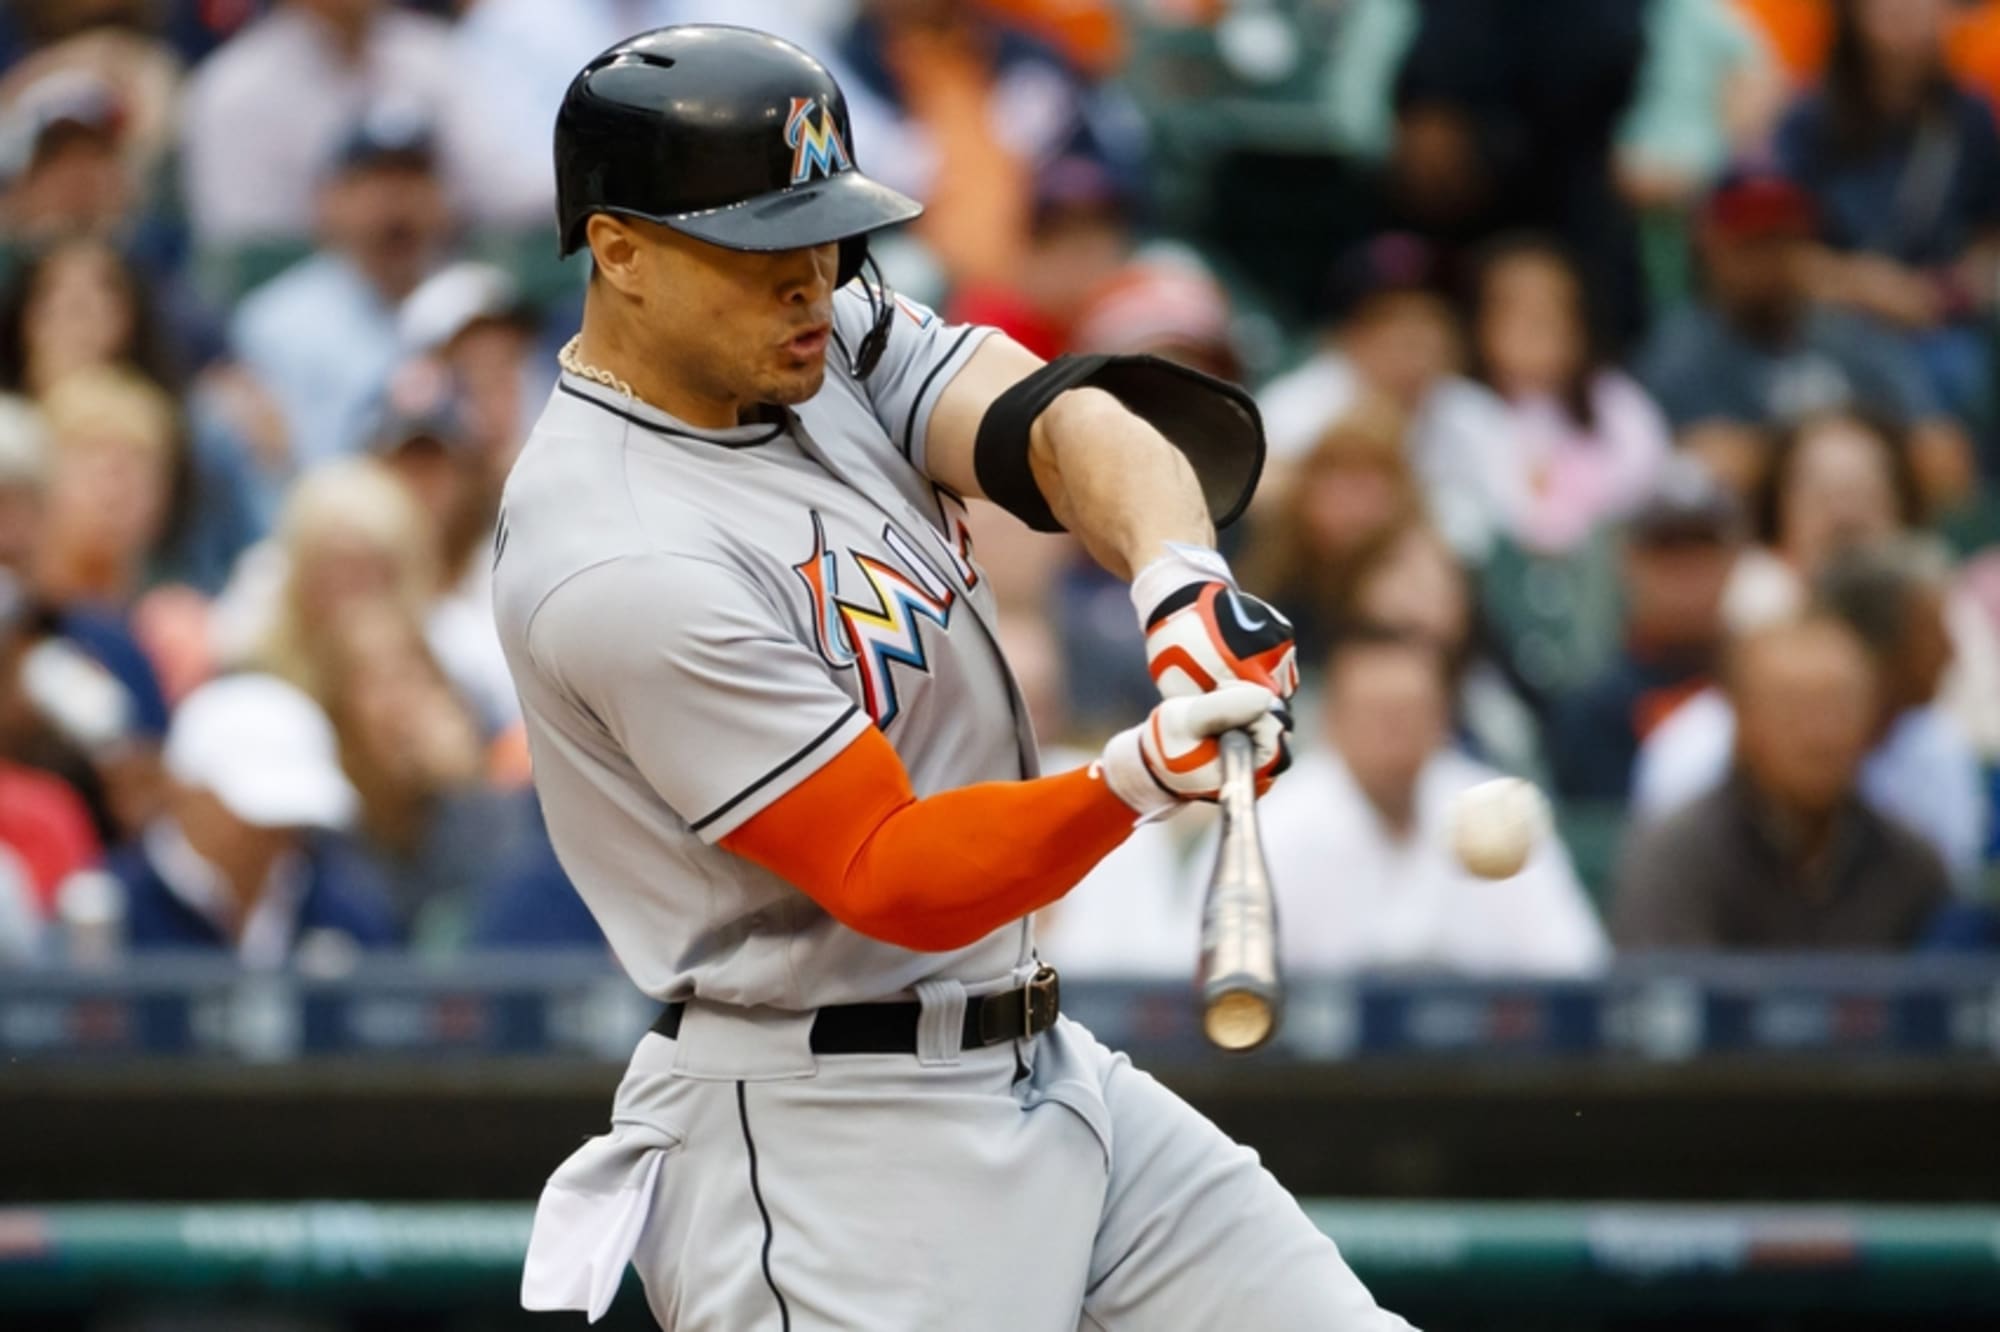 Fish Bites: Another Rumor About Miami Marlins' Giancarlo Stanton